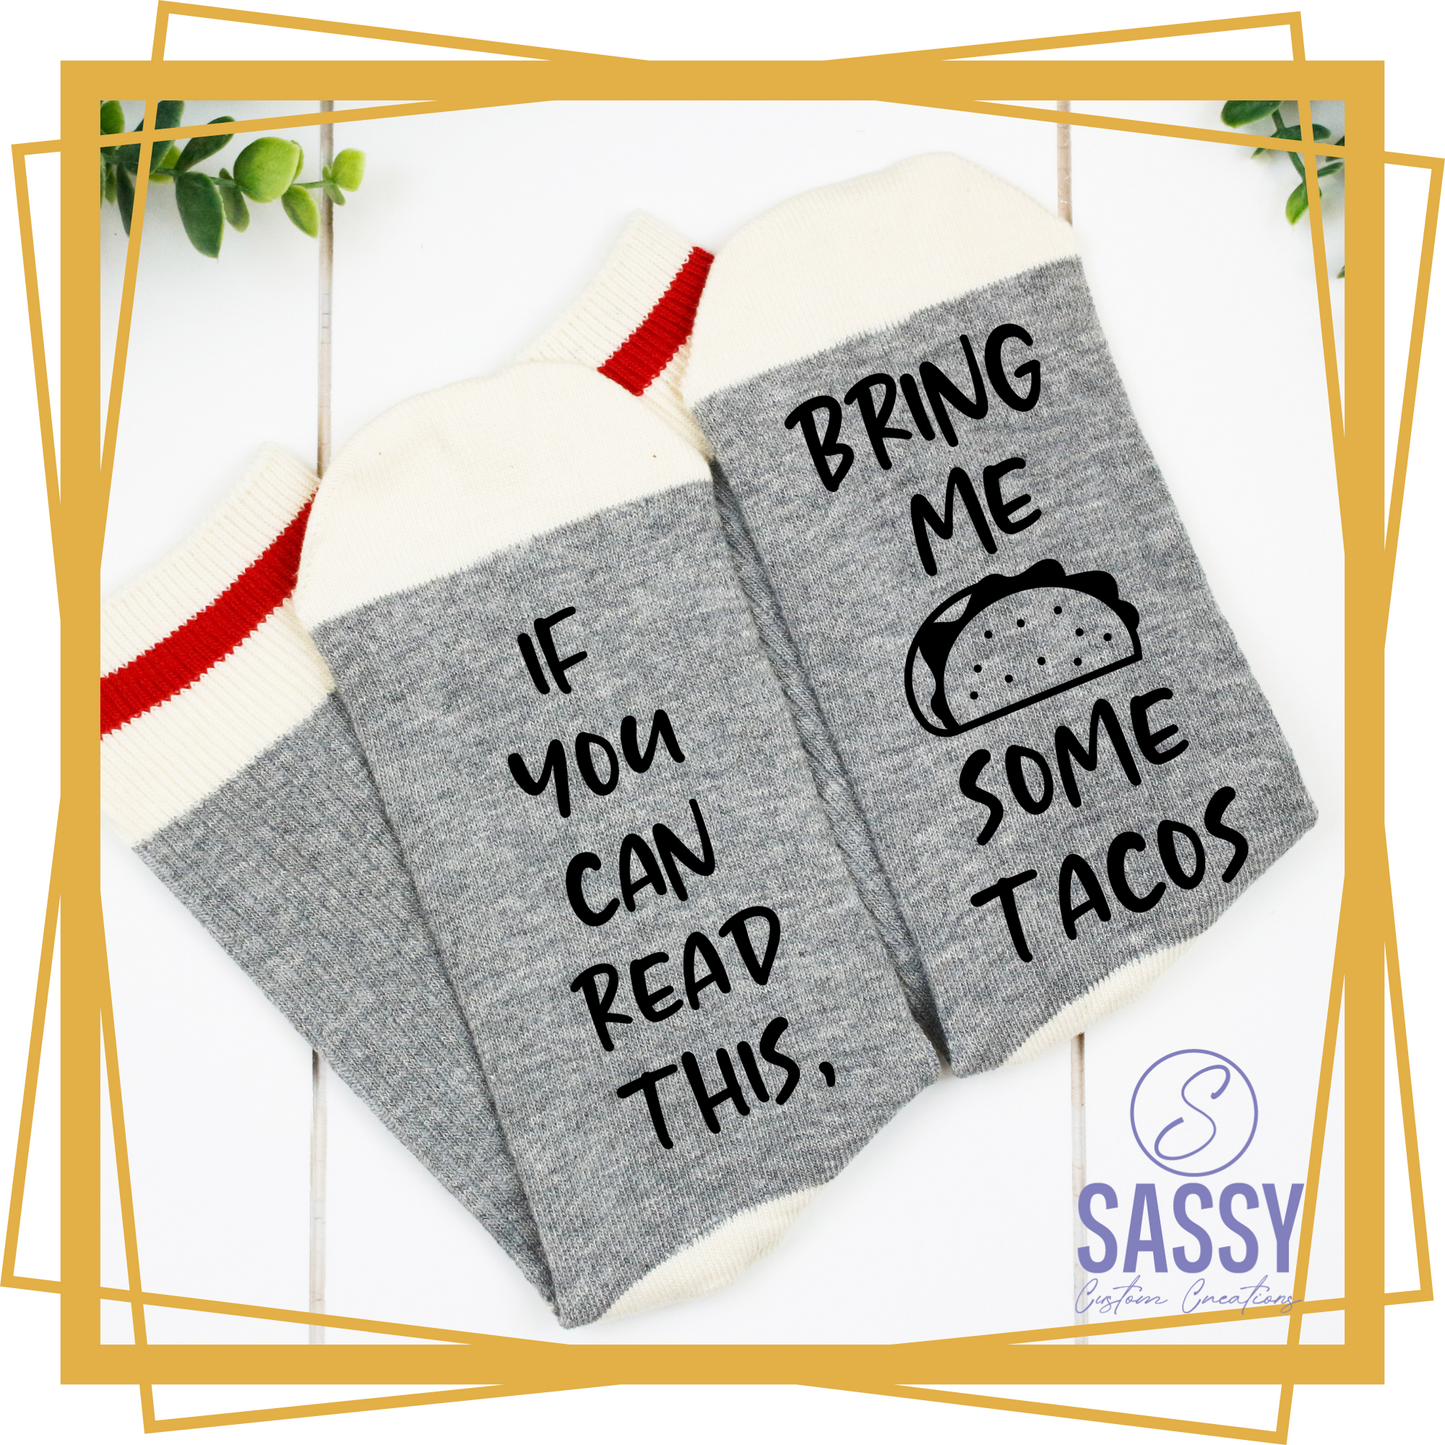 IF YOU CAN READ THIS, BRING ME SOME TACOS